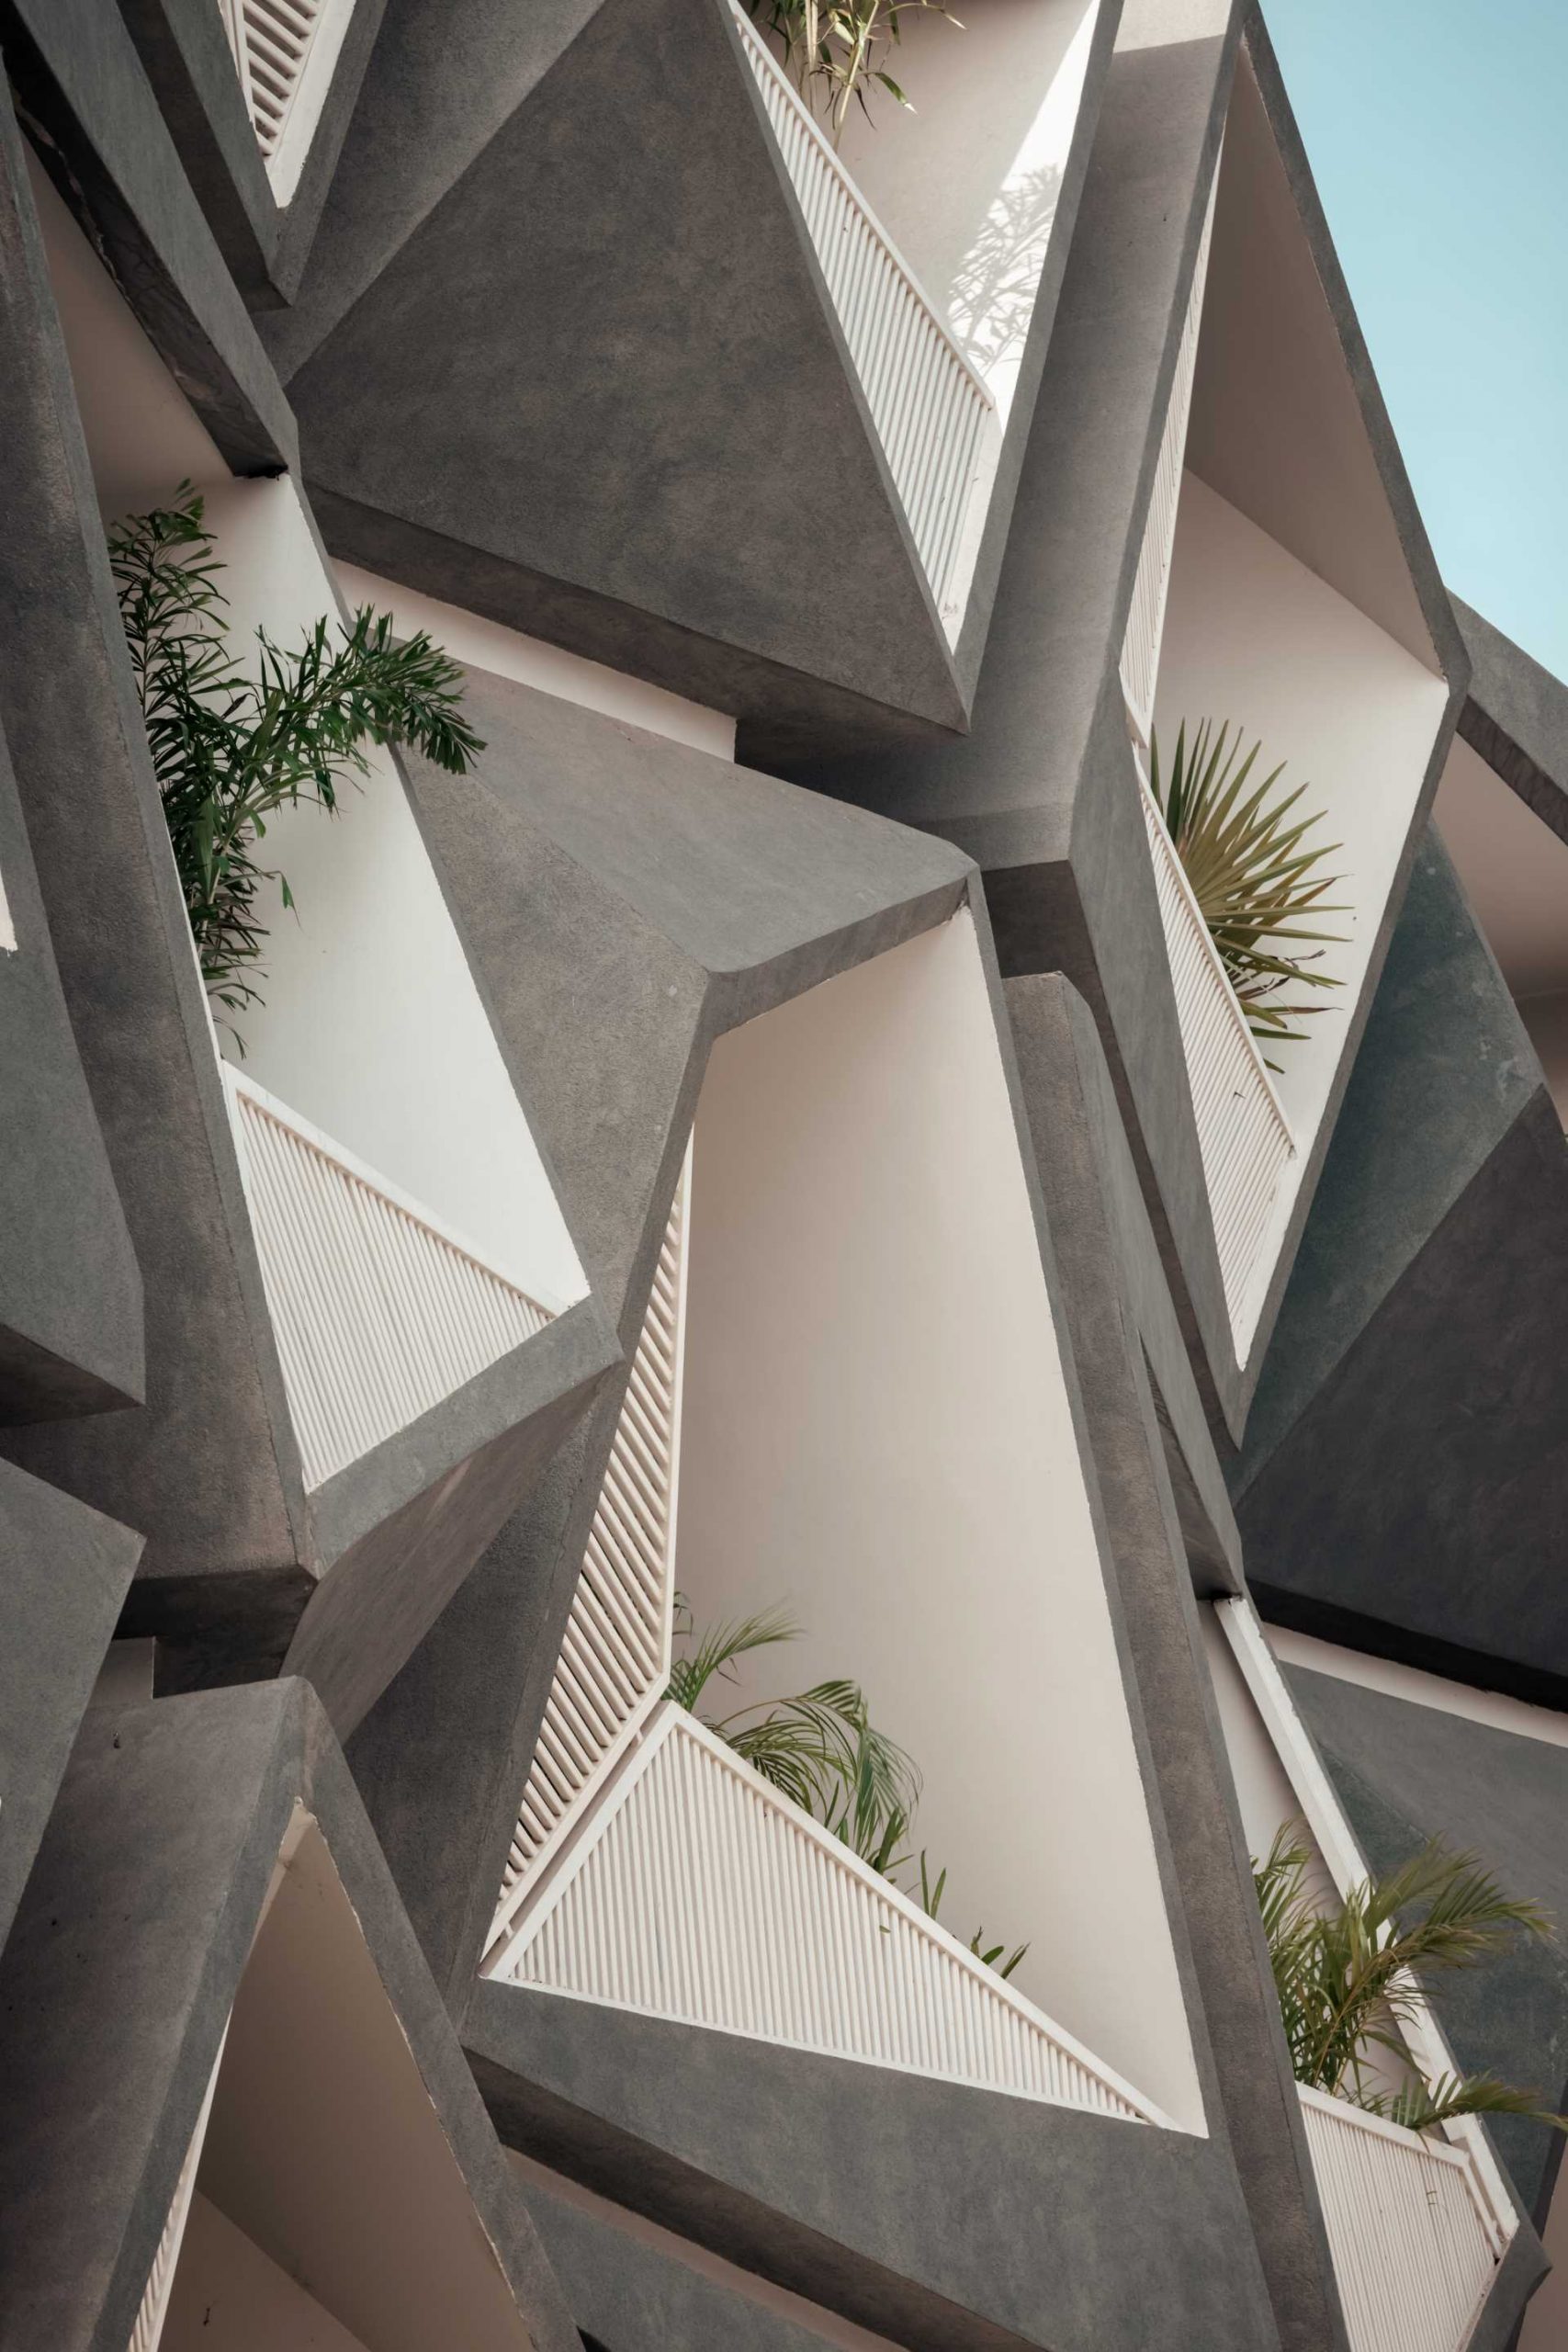 Angular balconies add interest to a building's facade.